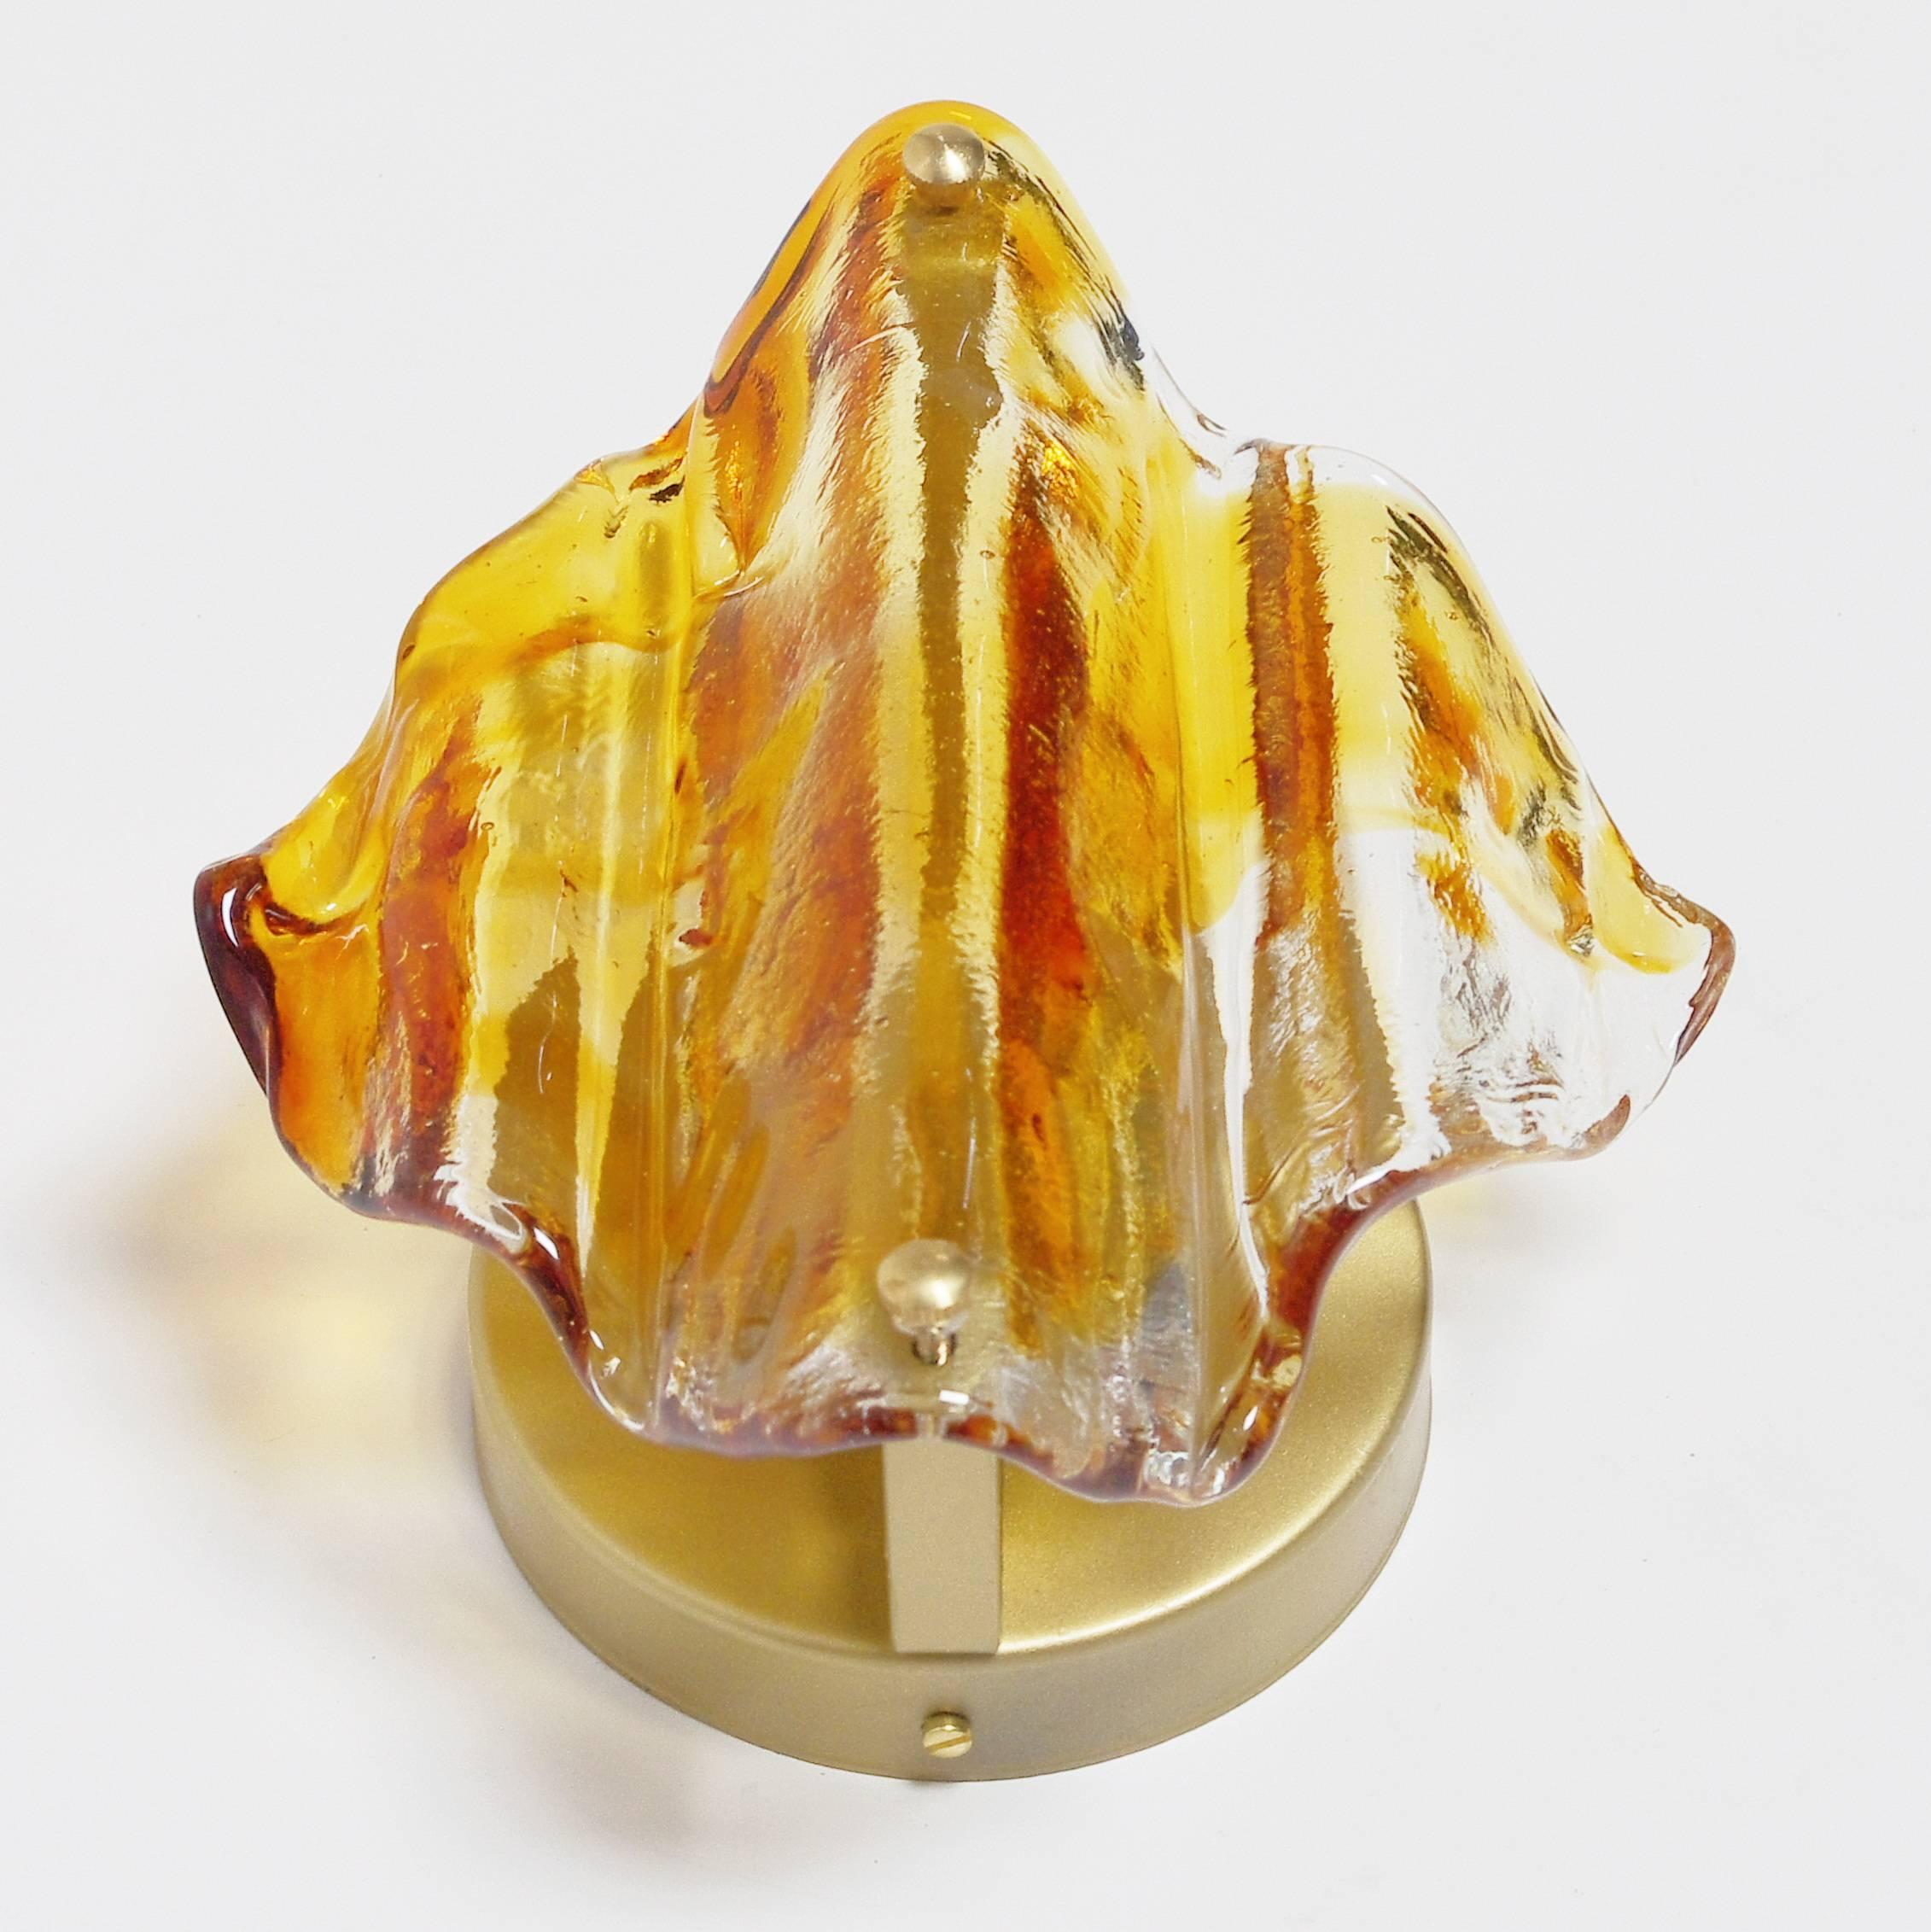 Vintage Italian wall light or flush mount with diffused amber and clear Murano glass hand blown to produce a contorted diamond piece, mounted on brass back plate / One minor crack in the top of the glass due to wear and tear / Designed by Mazzega,